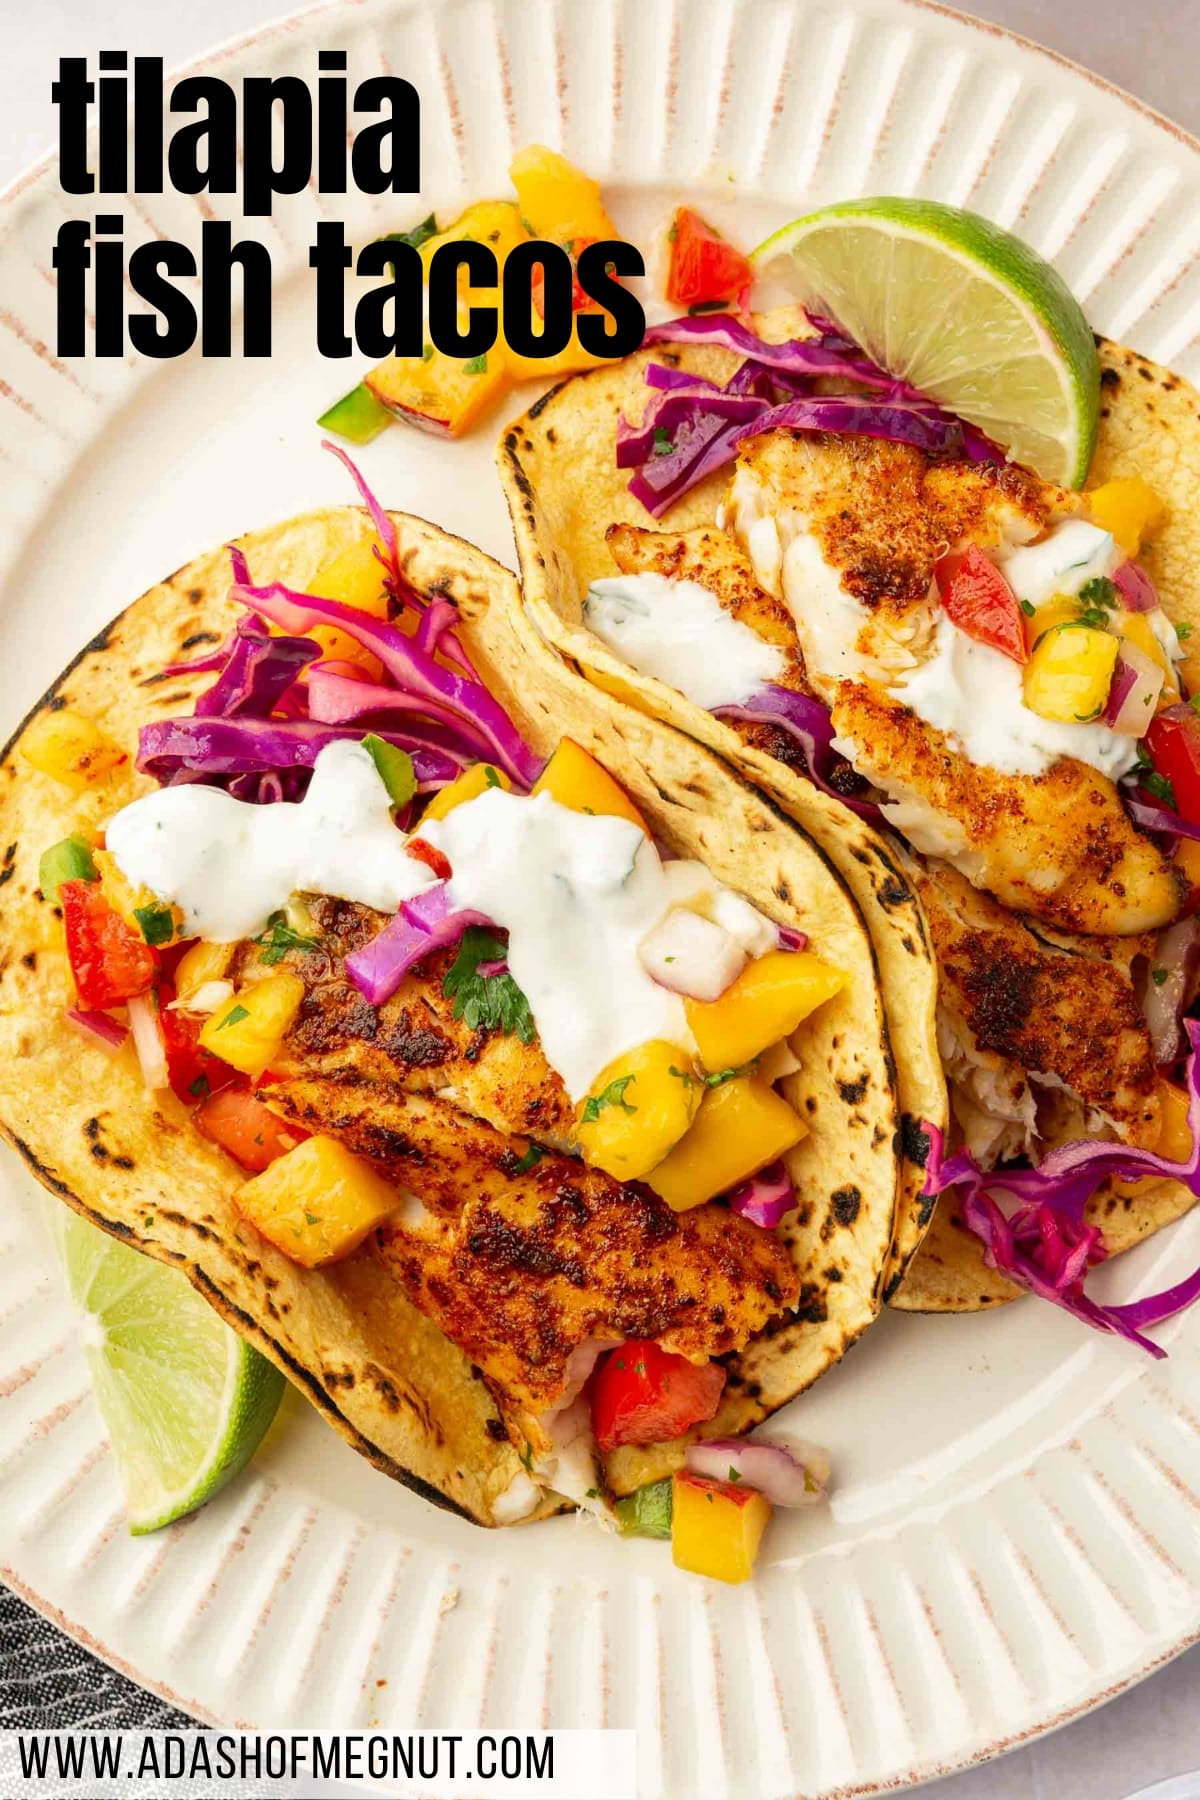 Two tilapia fish tacos topped with fruit salsa, cabbage slaw, sour cream and lime wedges on a plate.